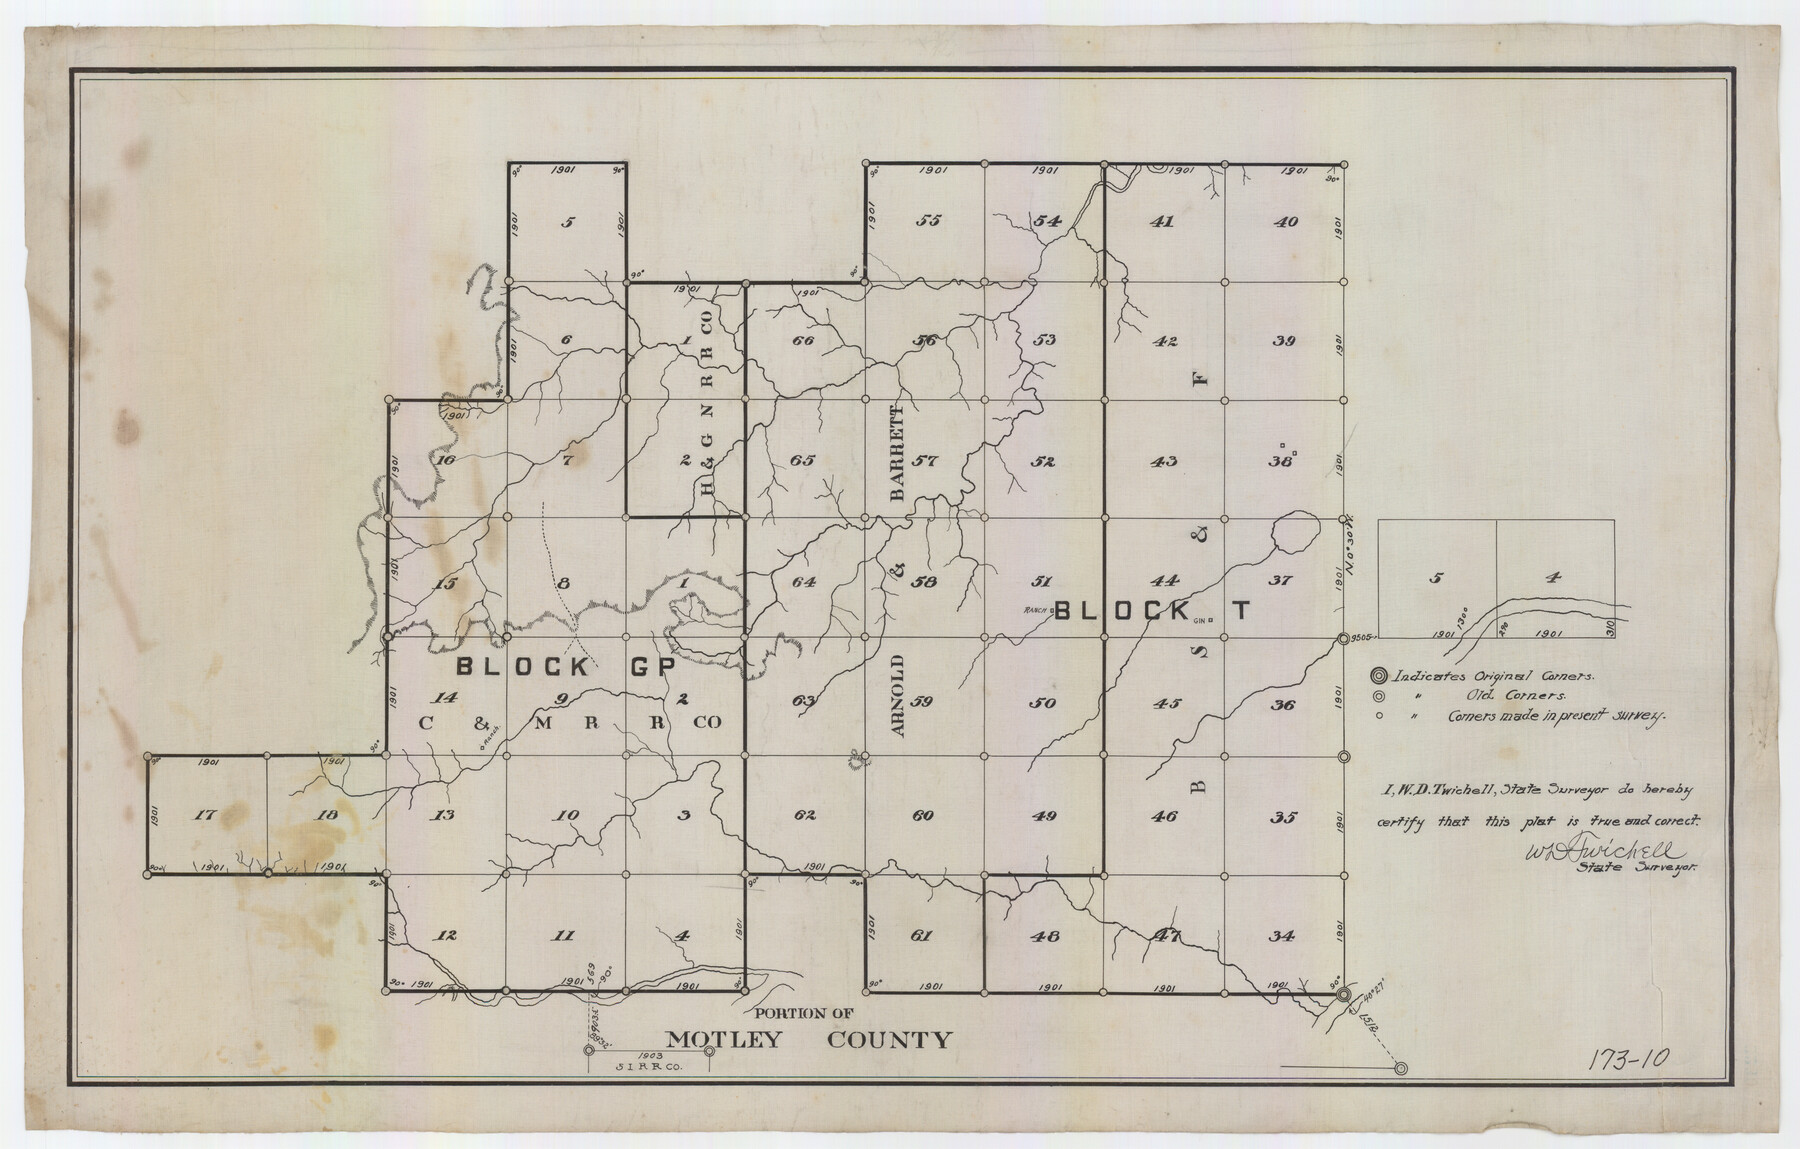 91501, [Portion of Motley County], Twichell Survey Records